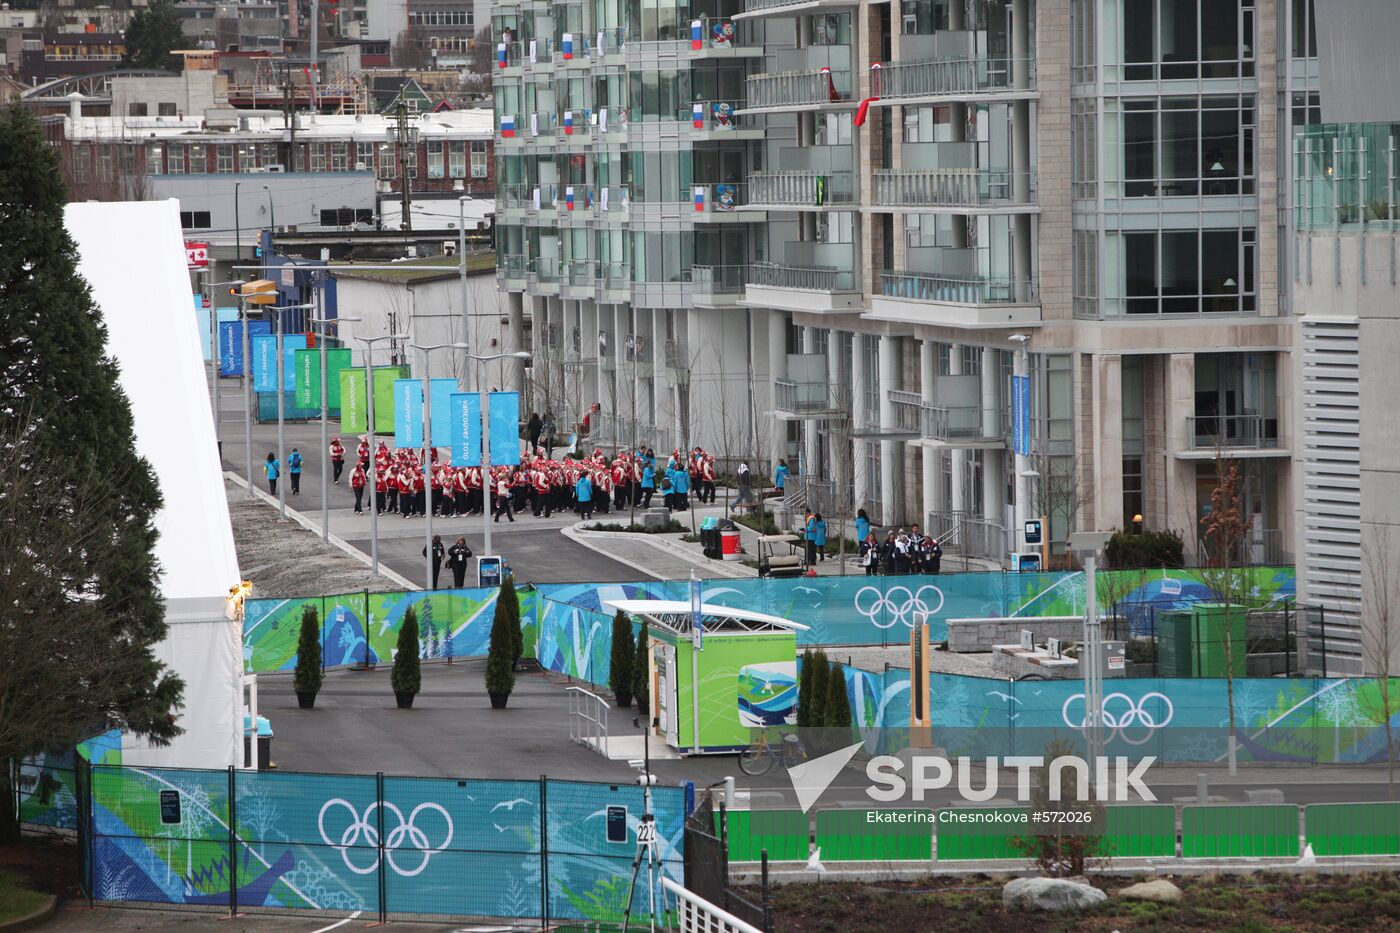 Olympic village in Vancouver